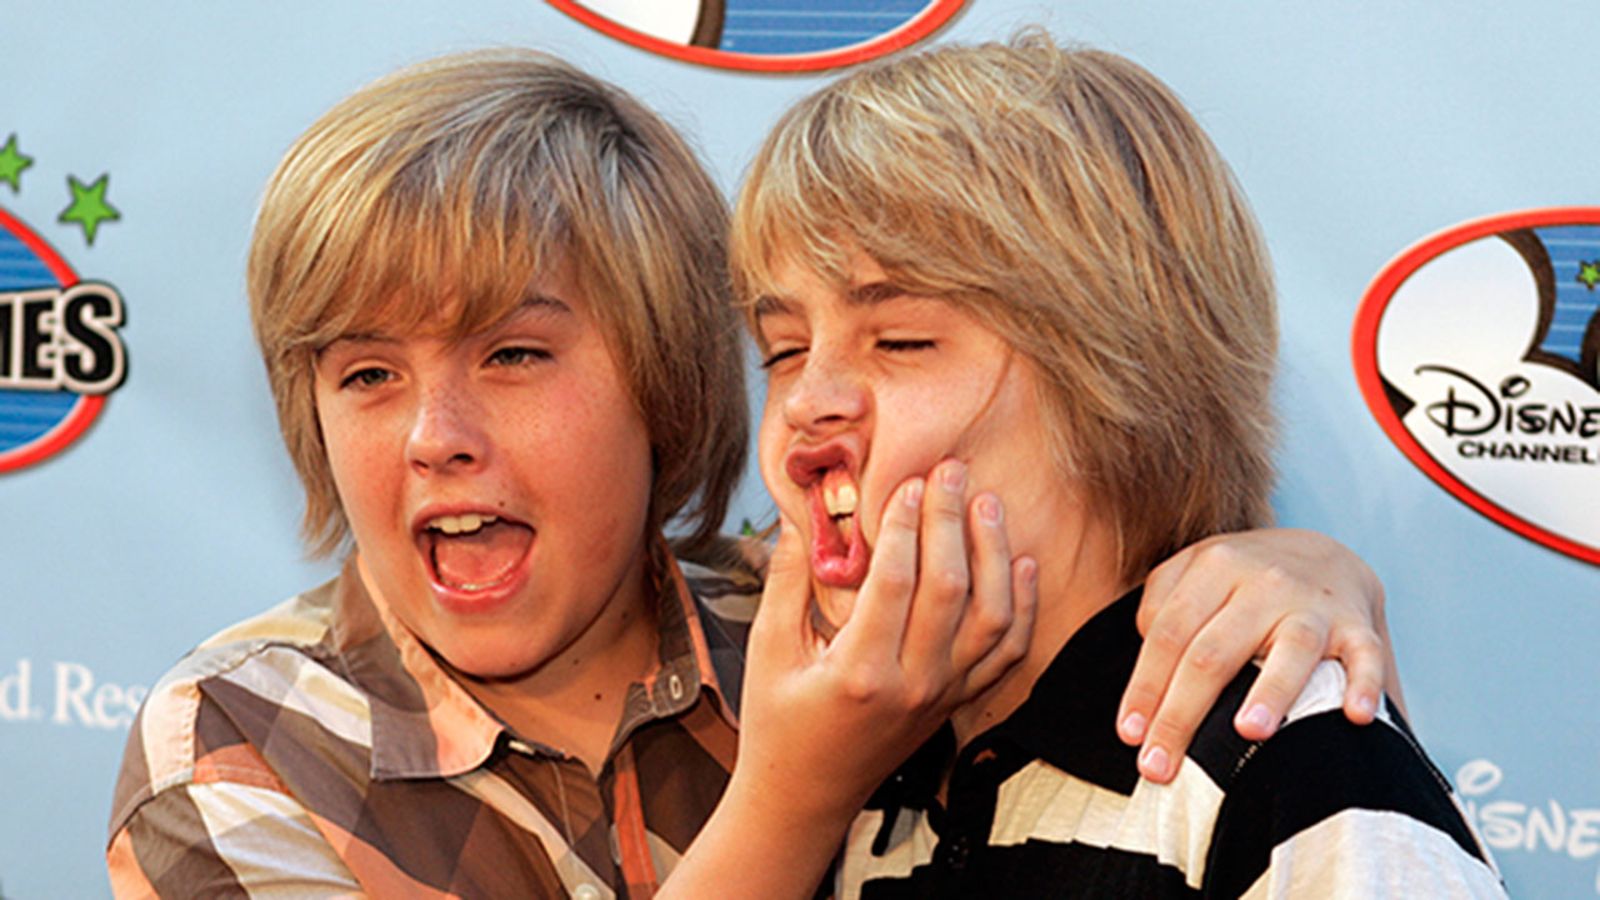 Suite Life of Zack and Cody' child stars Cole and Dylan Sprouse graduate from New York University